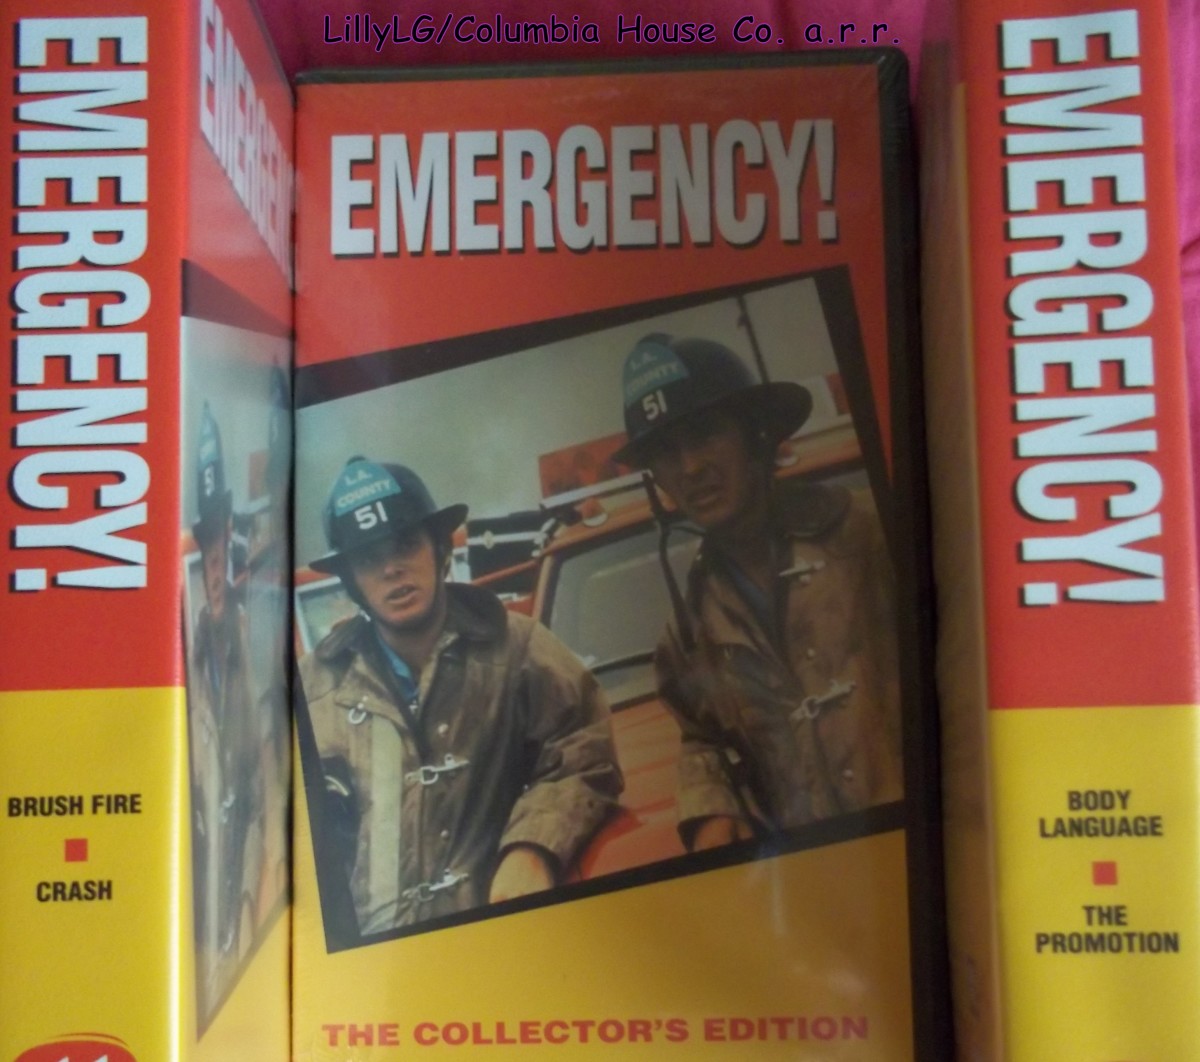 Video's of Emergency! It took technology time to catch up. VHS VCR tapes were a new thing in the late 1970's too.